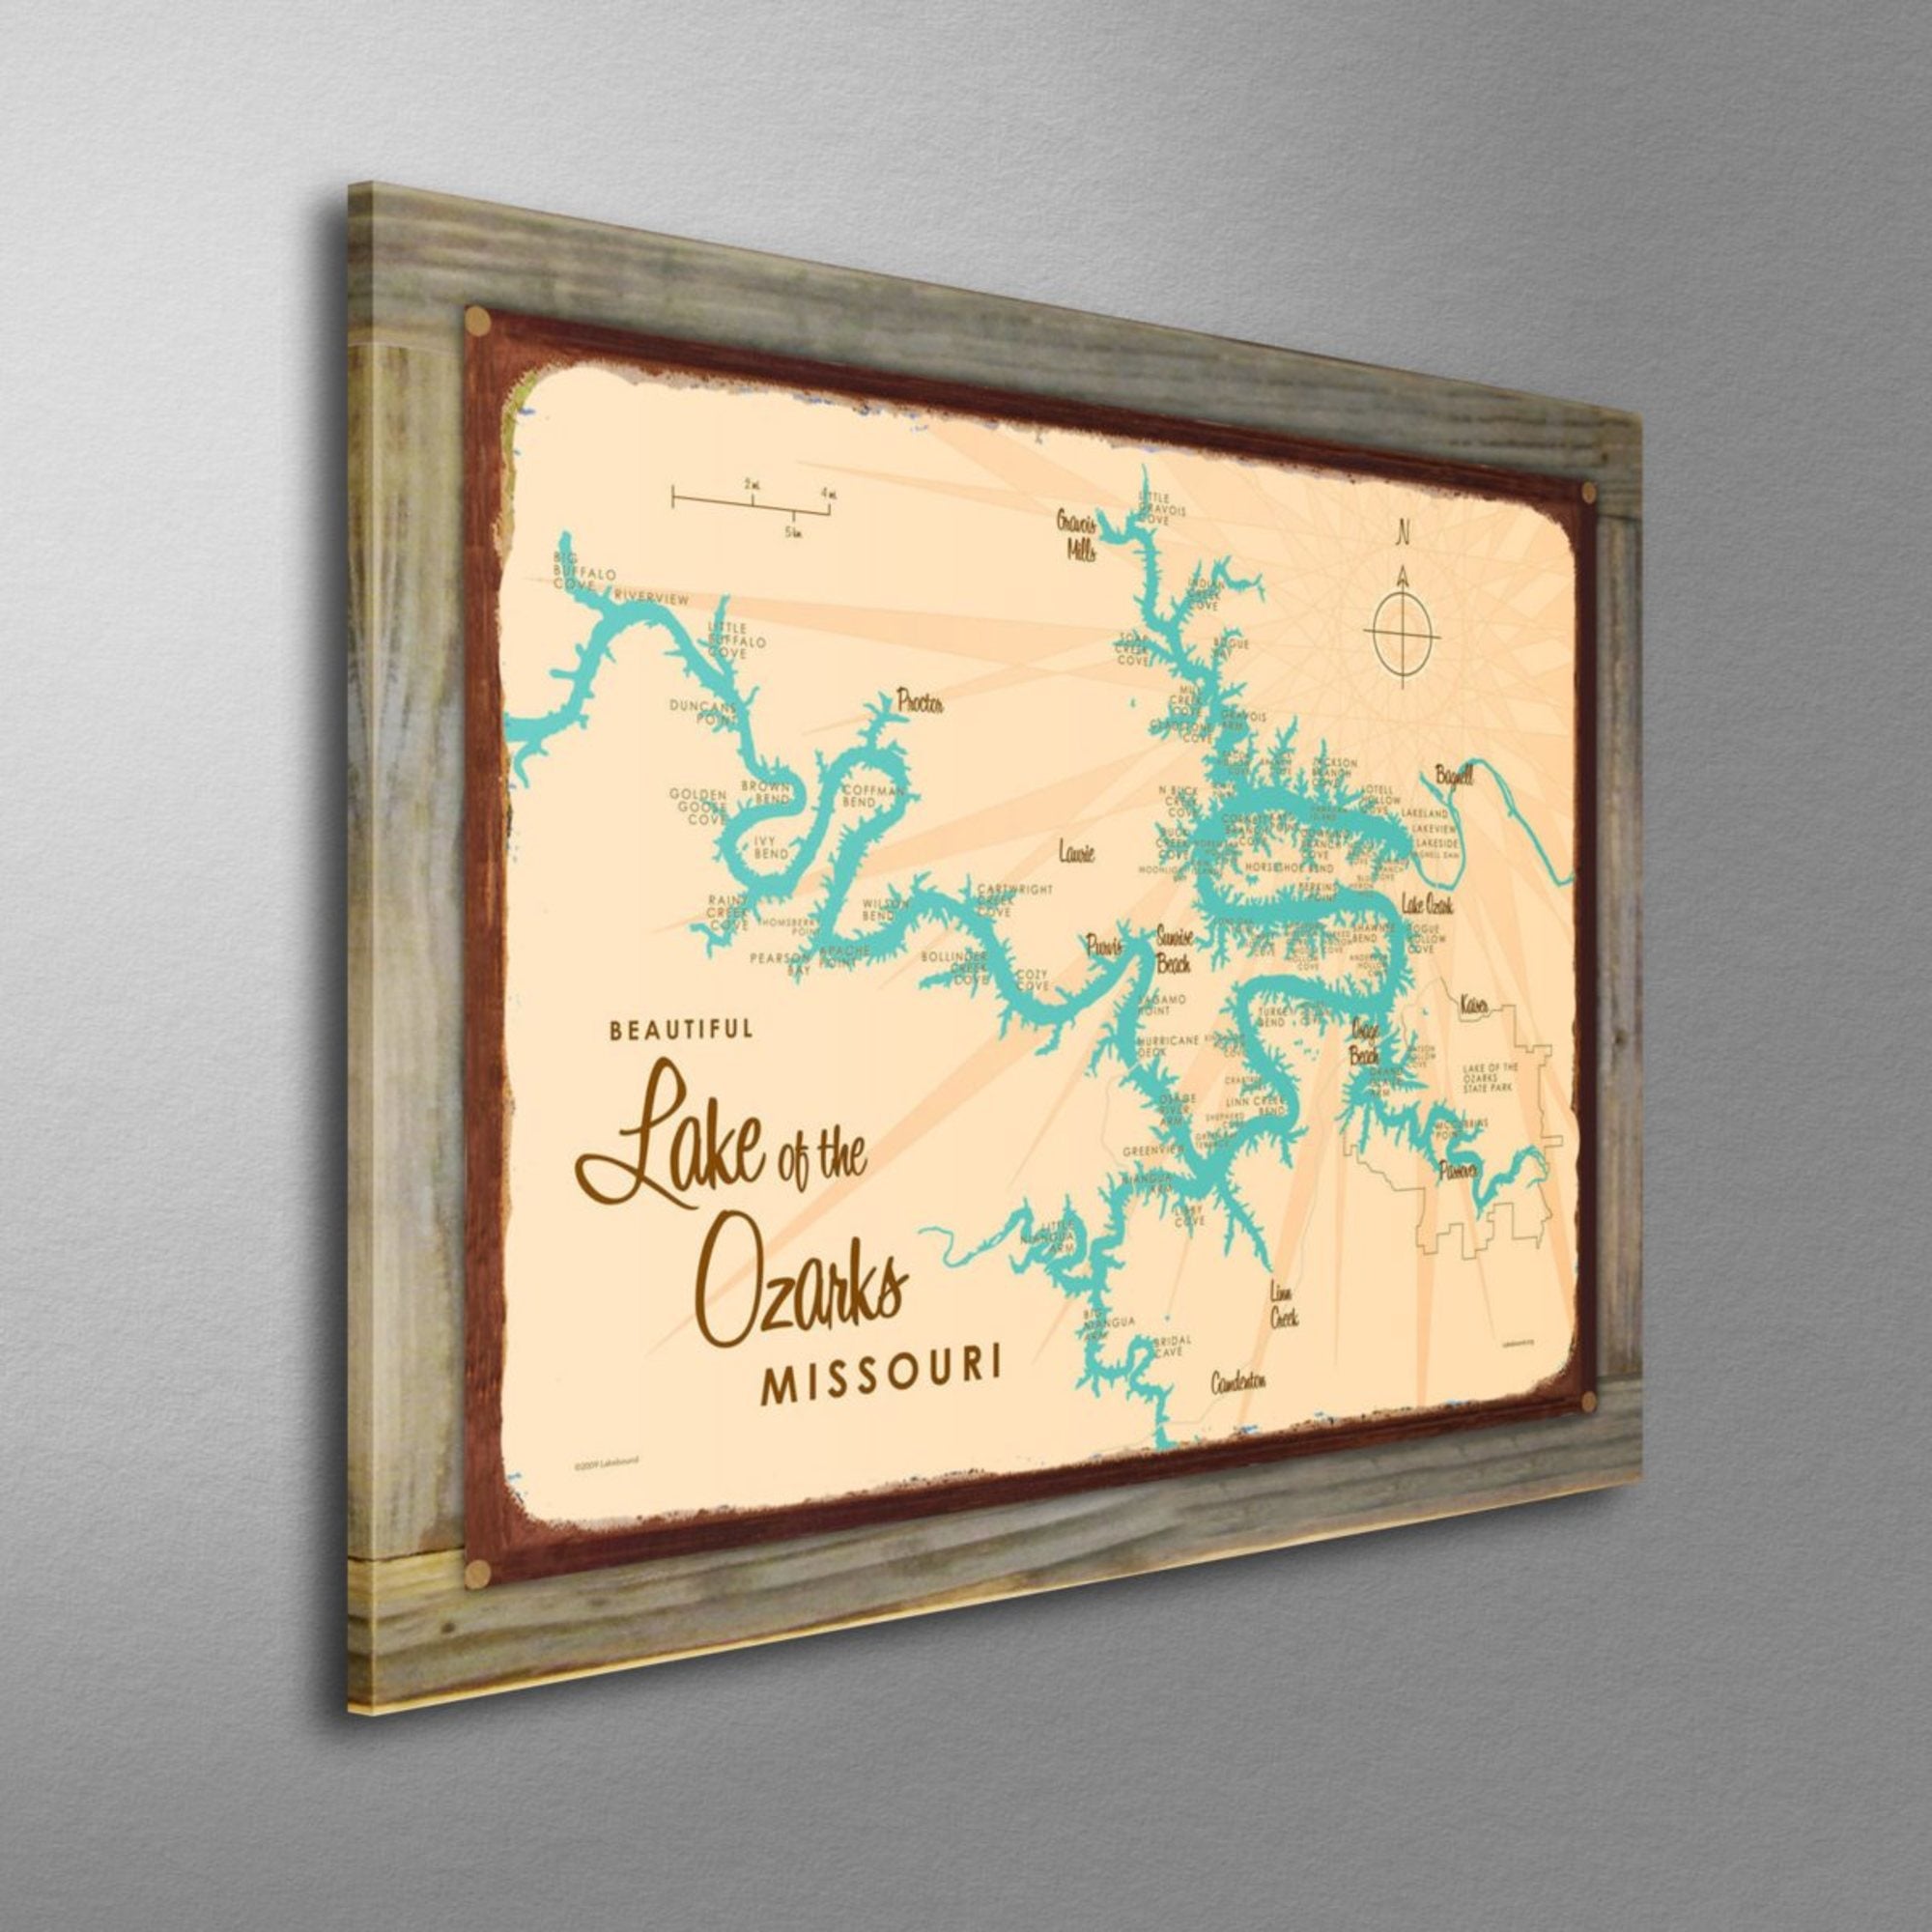 Lake of the Ozarks Missouri (no Mile Markers), Wood-Mounted Rustic Metal Sign Map Art